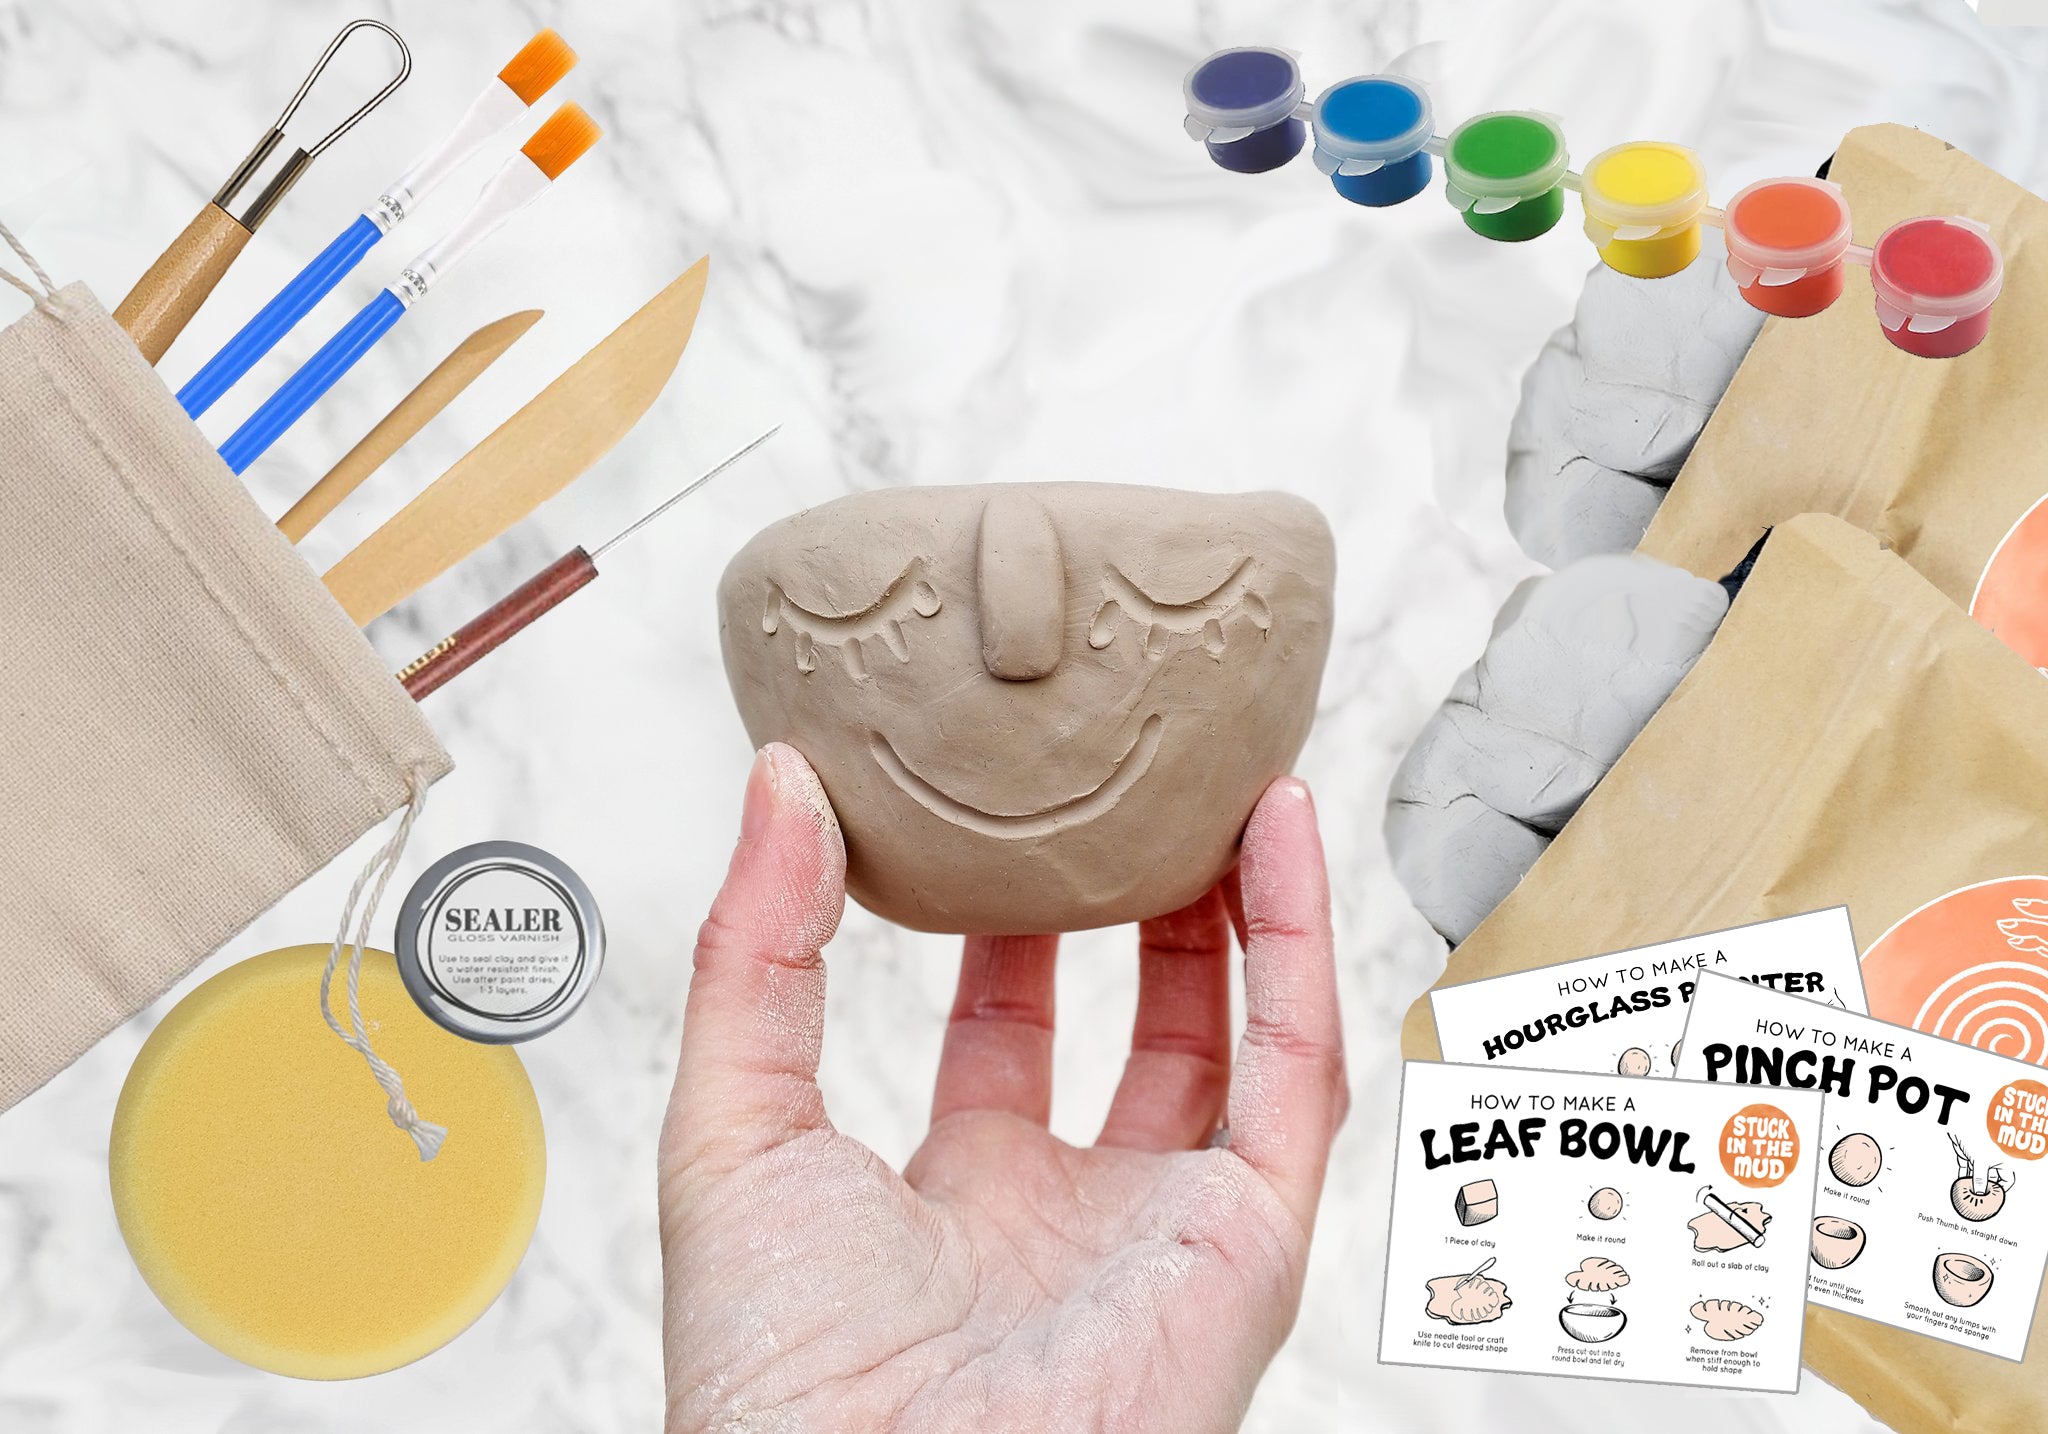 Pottery kit for making ceramics at home - air-dry-clay kit for separate